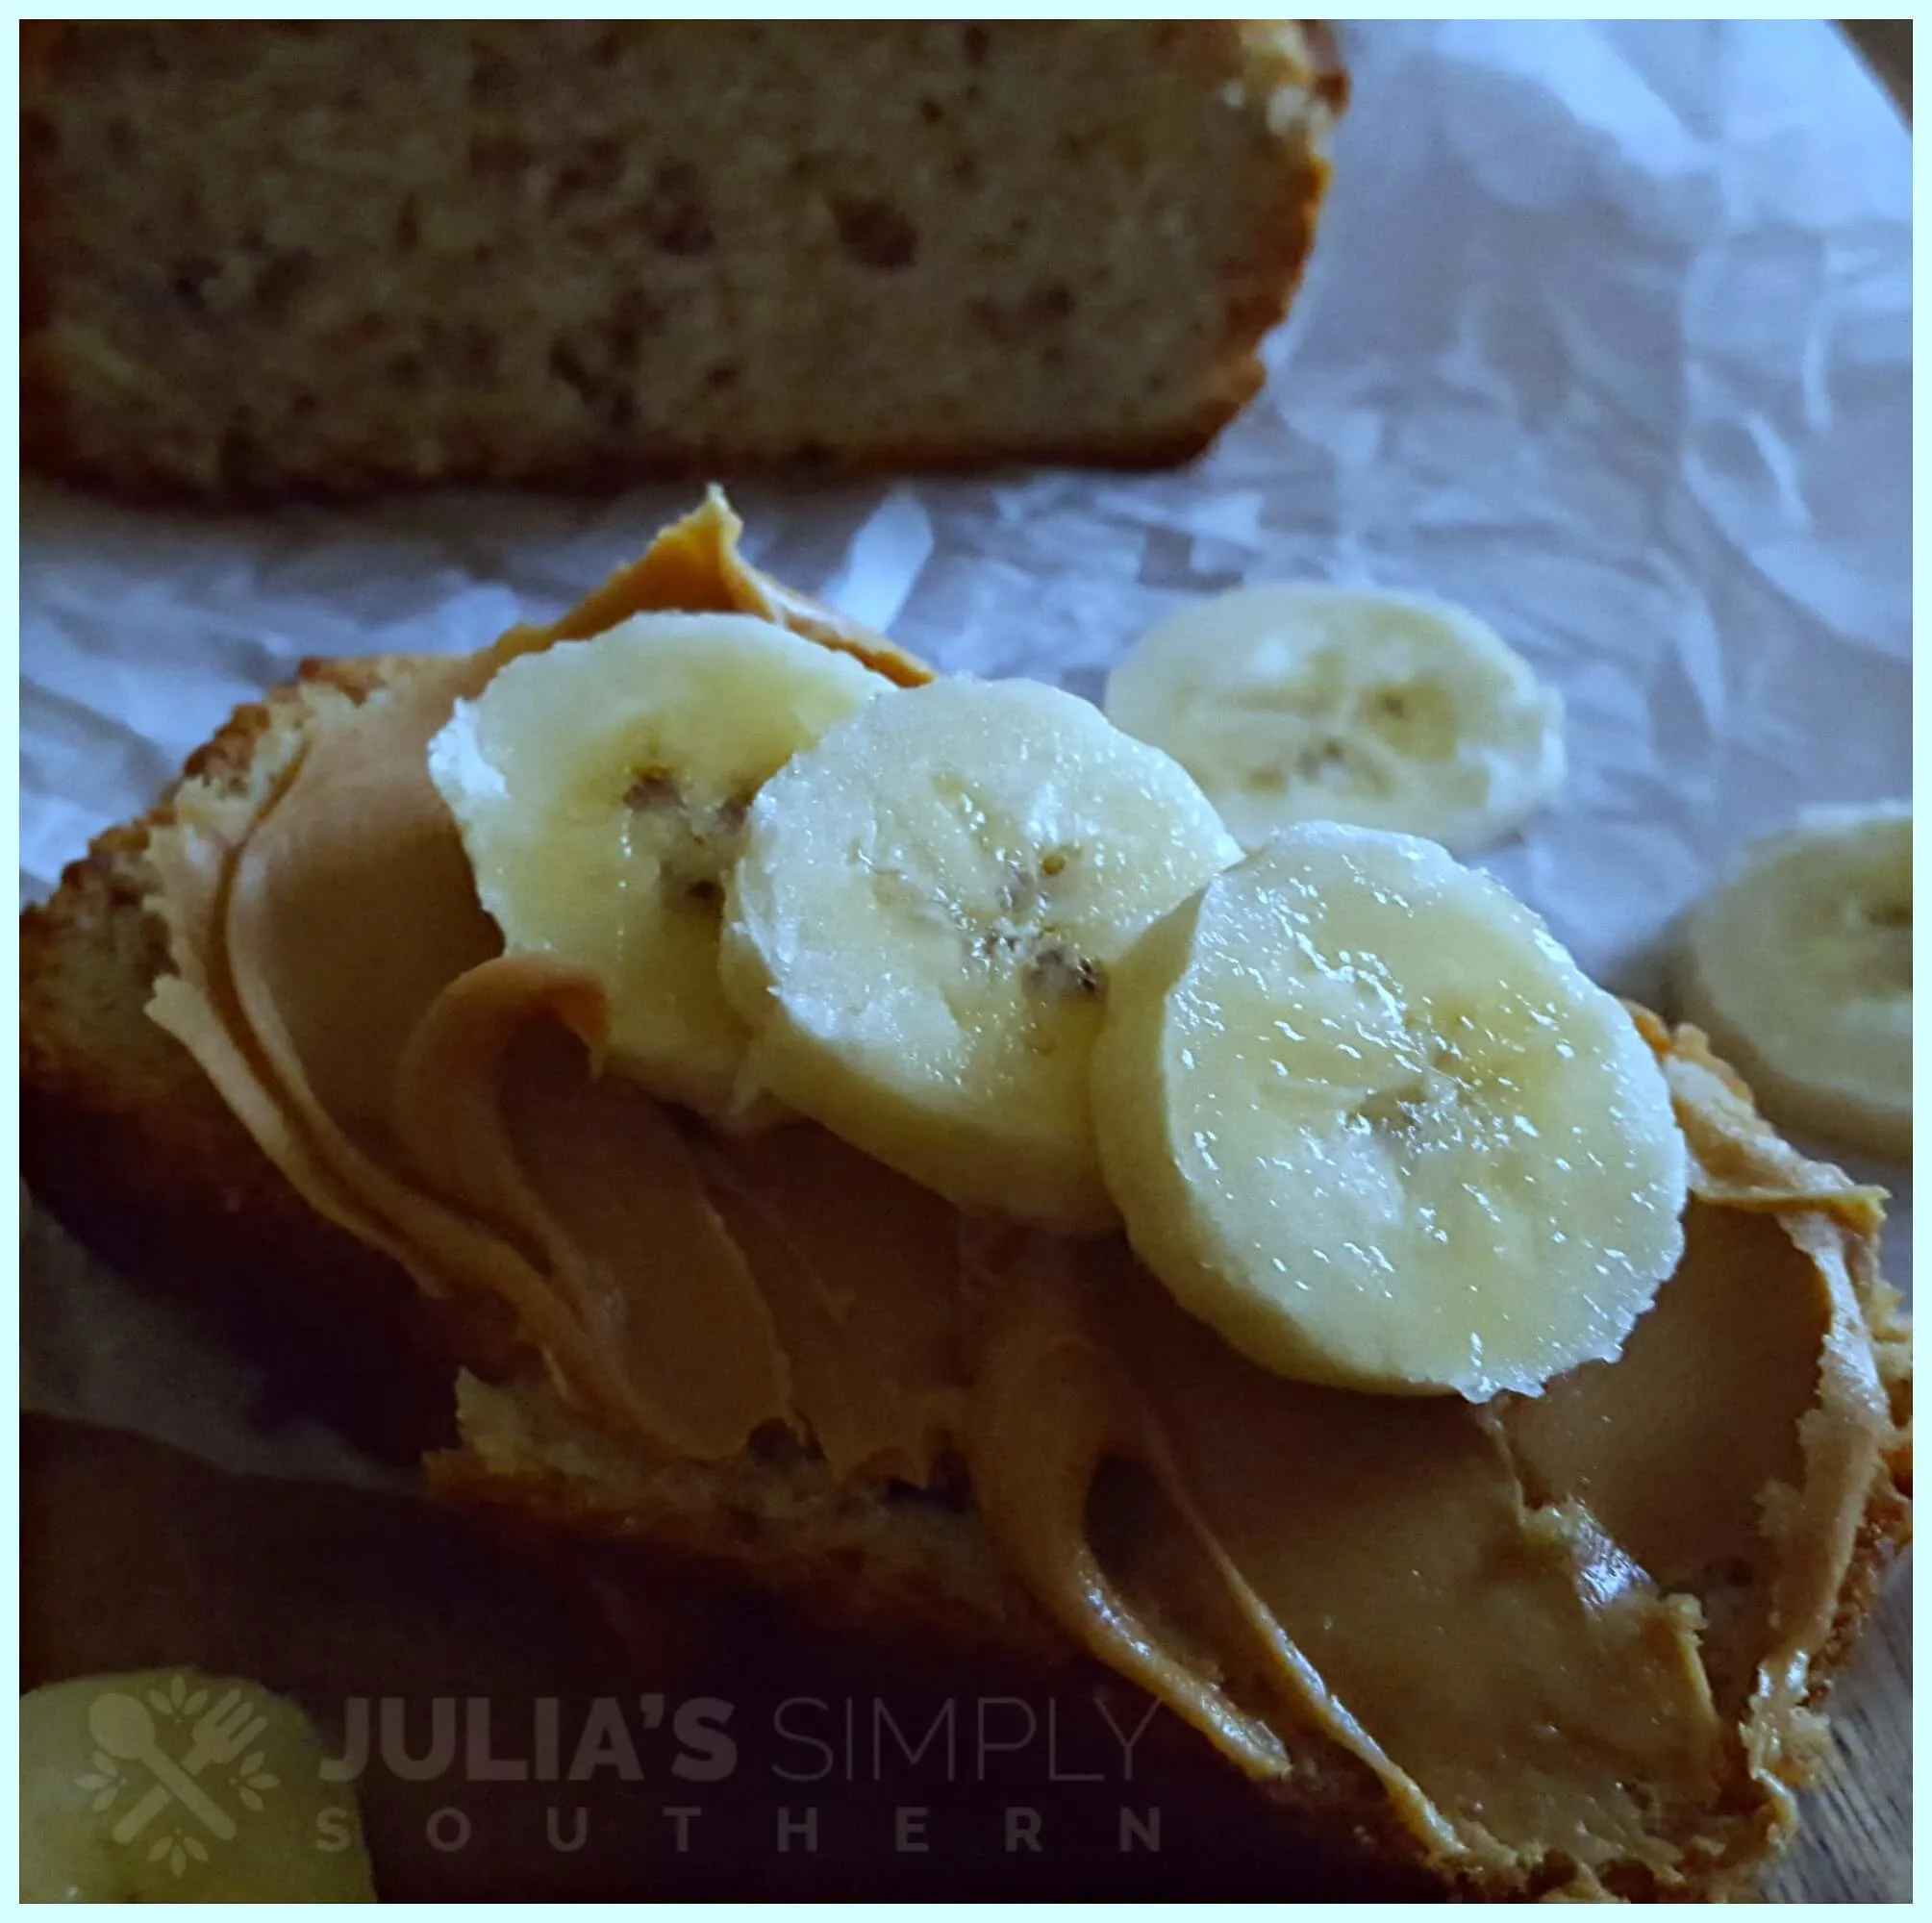 Delicious moist old fashioned homemade banana bread topped with peanut butter and sliced bananas